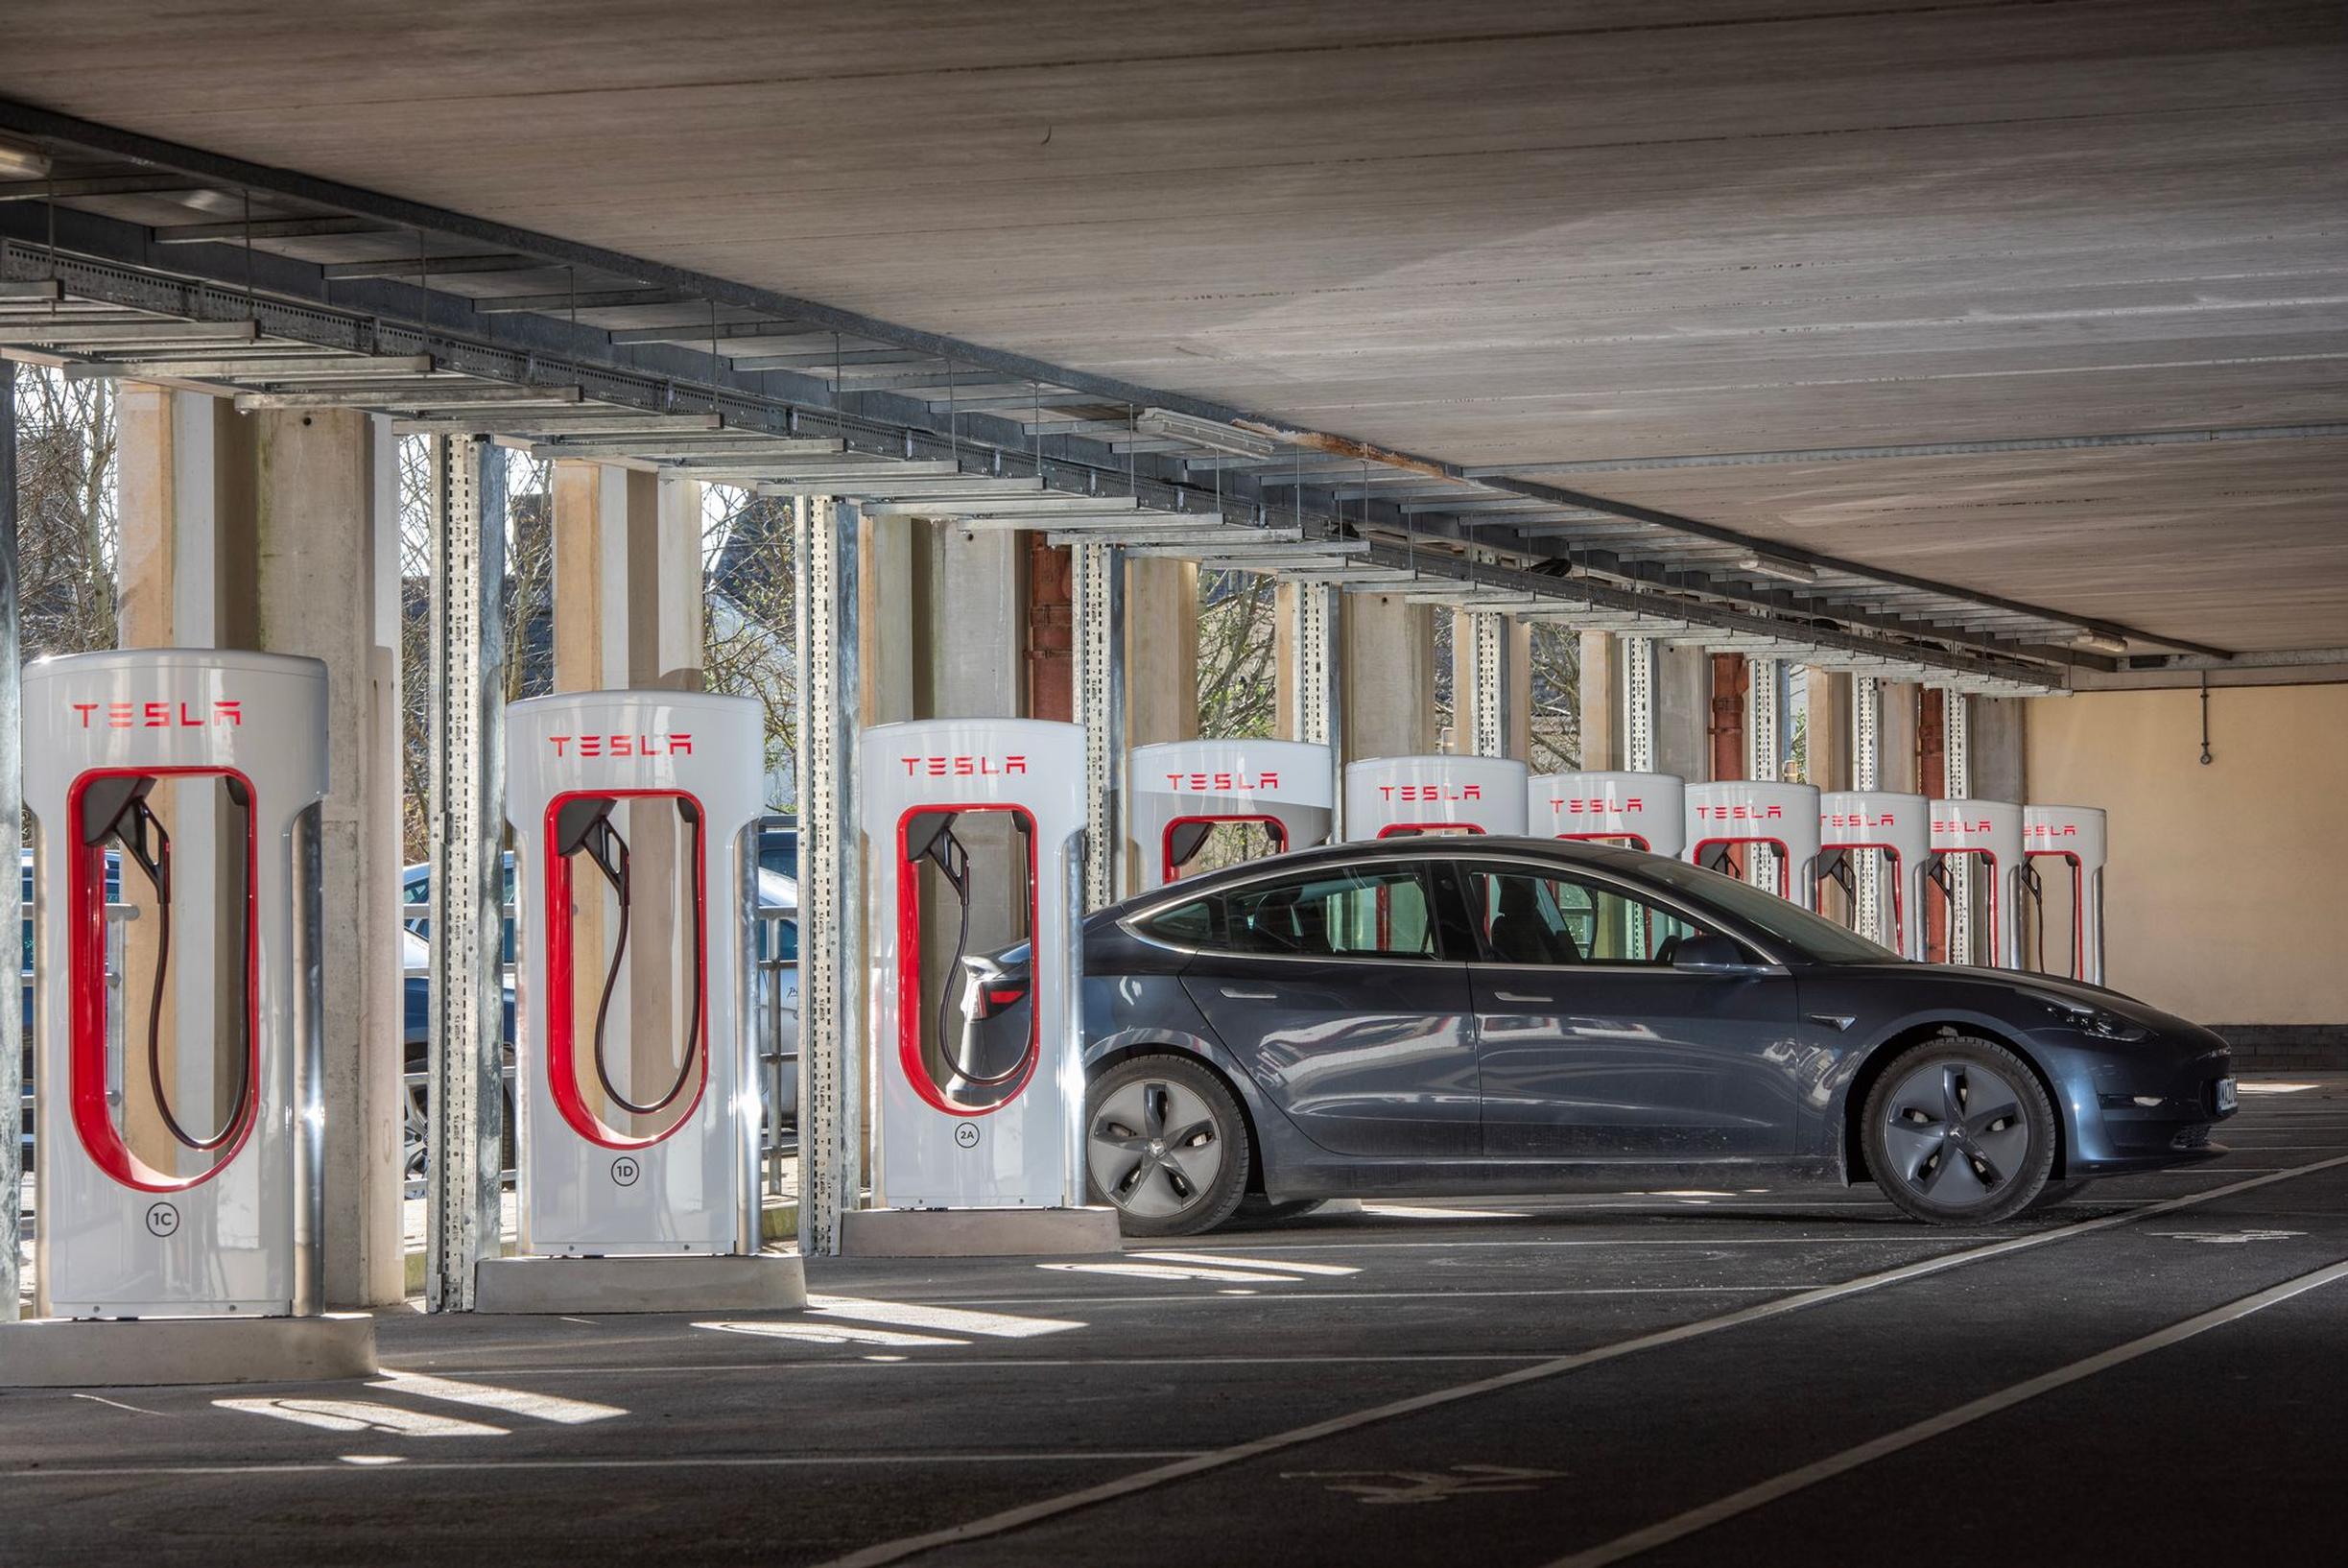 Tesla chargepoints at an APCOA mobility hub